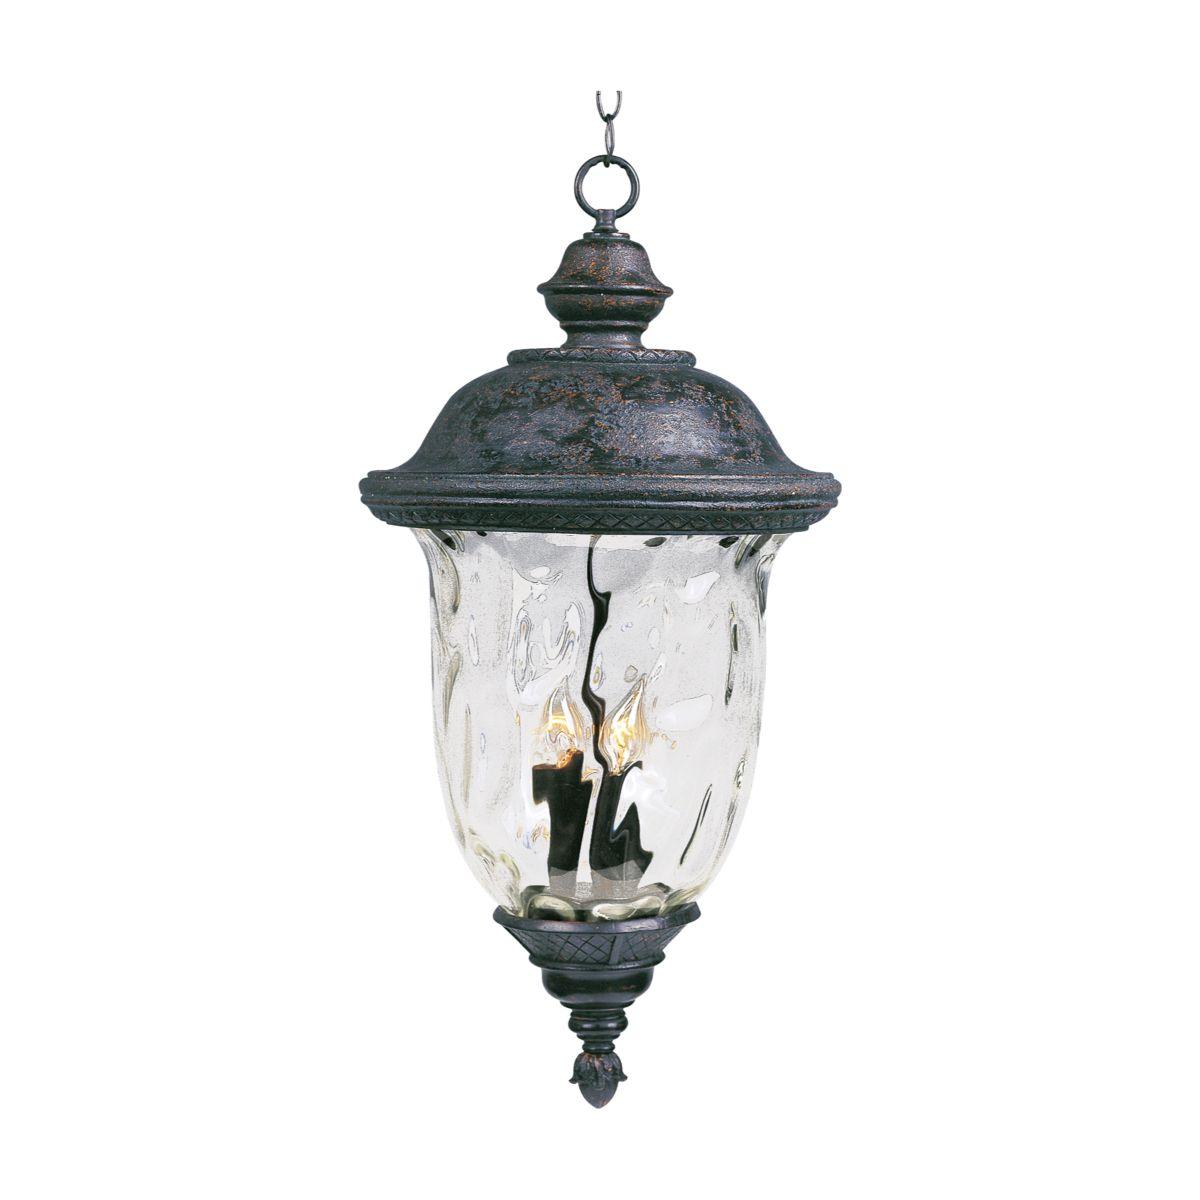 Carriage House DC 24 in. 3 Lights Outdoor Hanging Lantern Bronze Finish